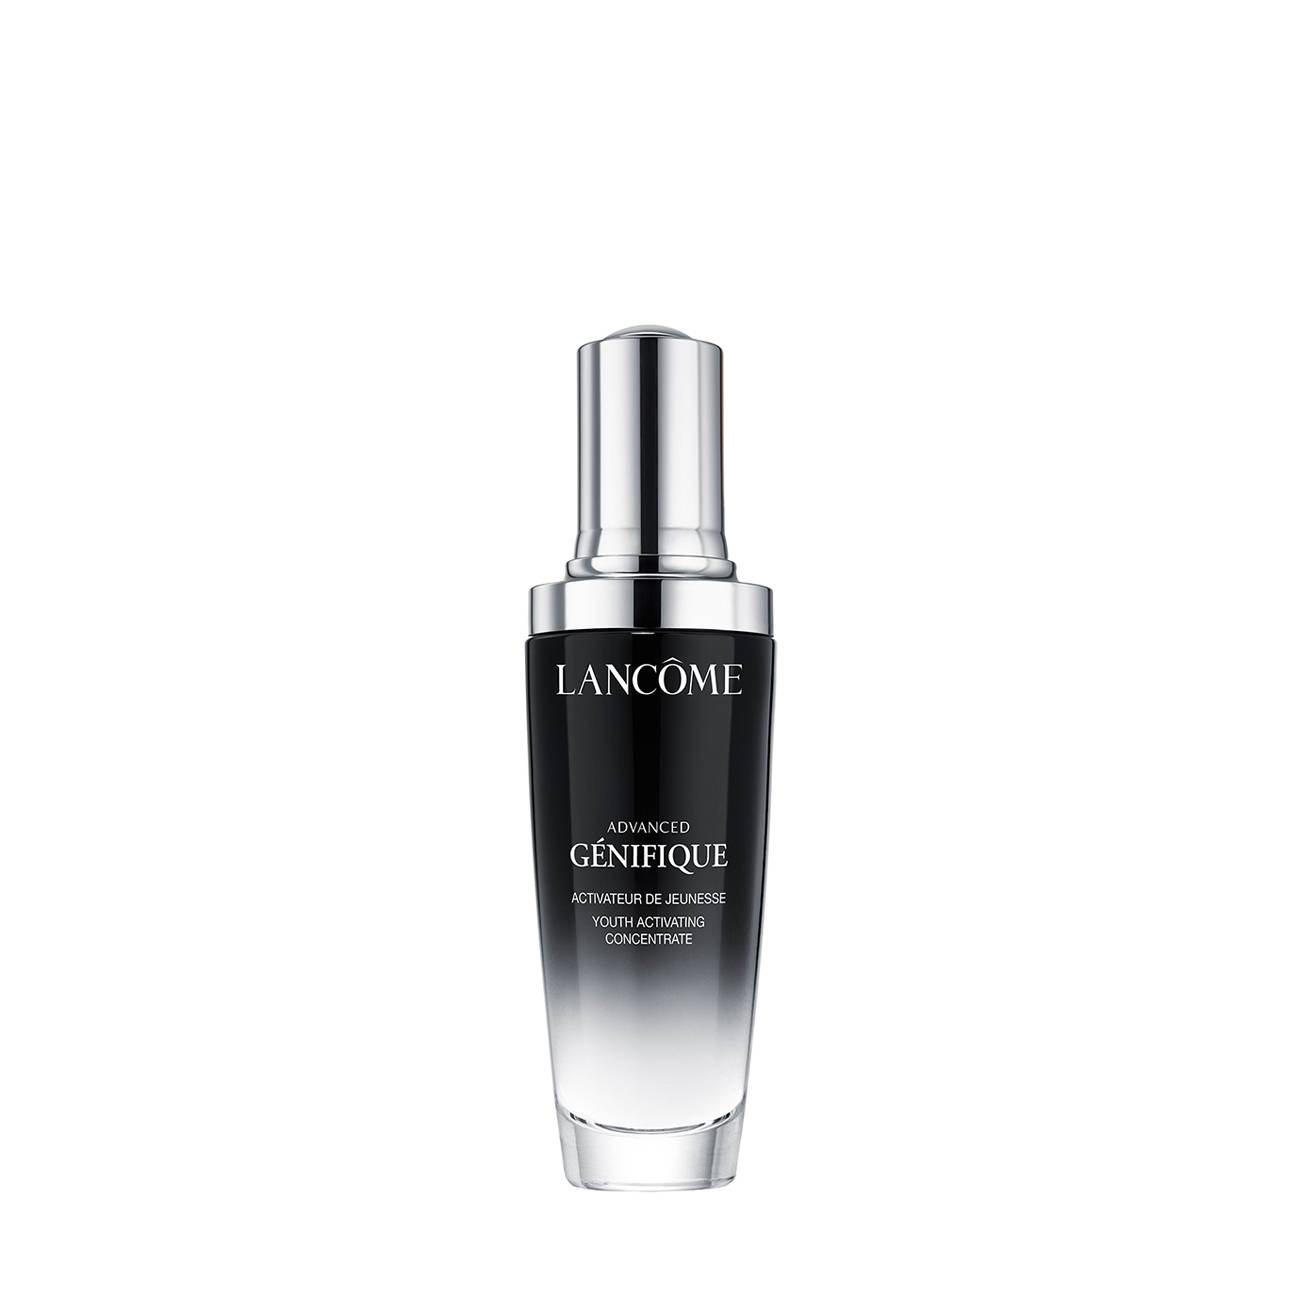 ADVANCED GENIFIQUE YOUTH ACTIVATING CONCENTRATE 50 ml